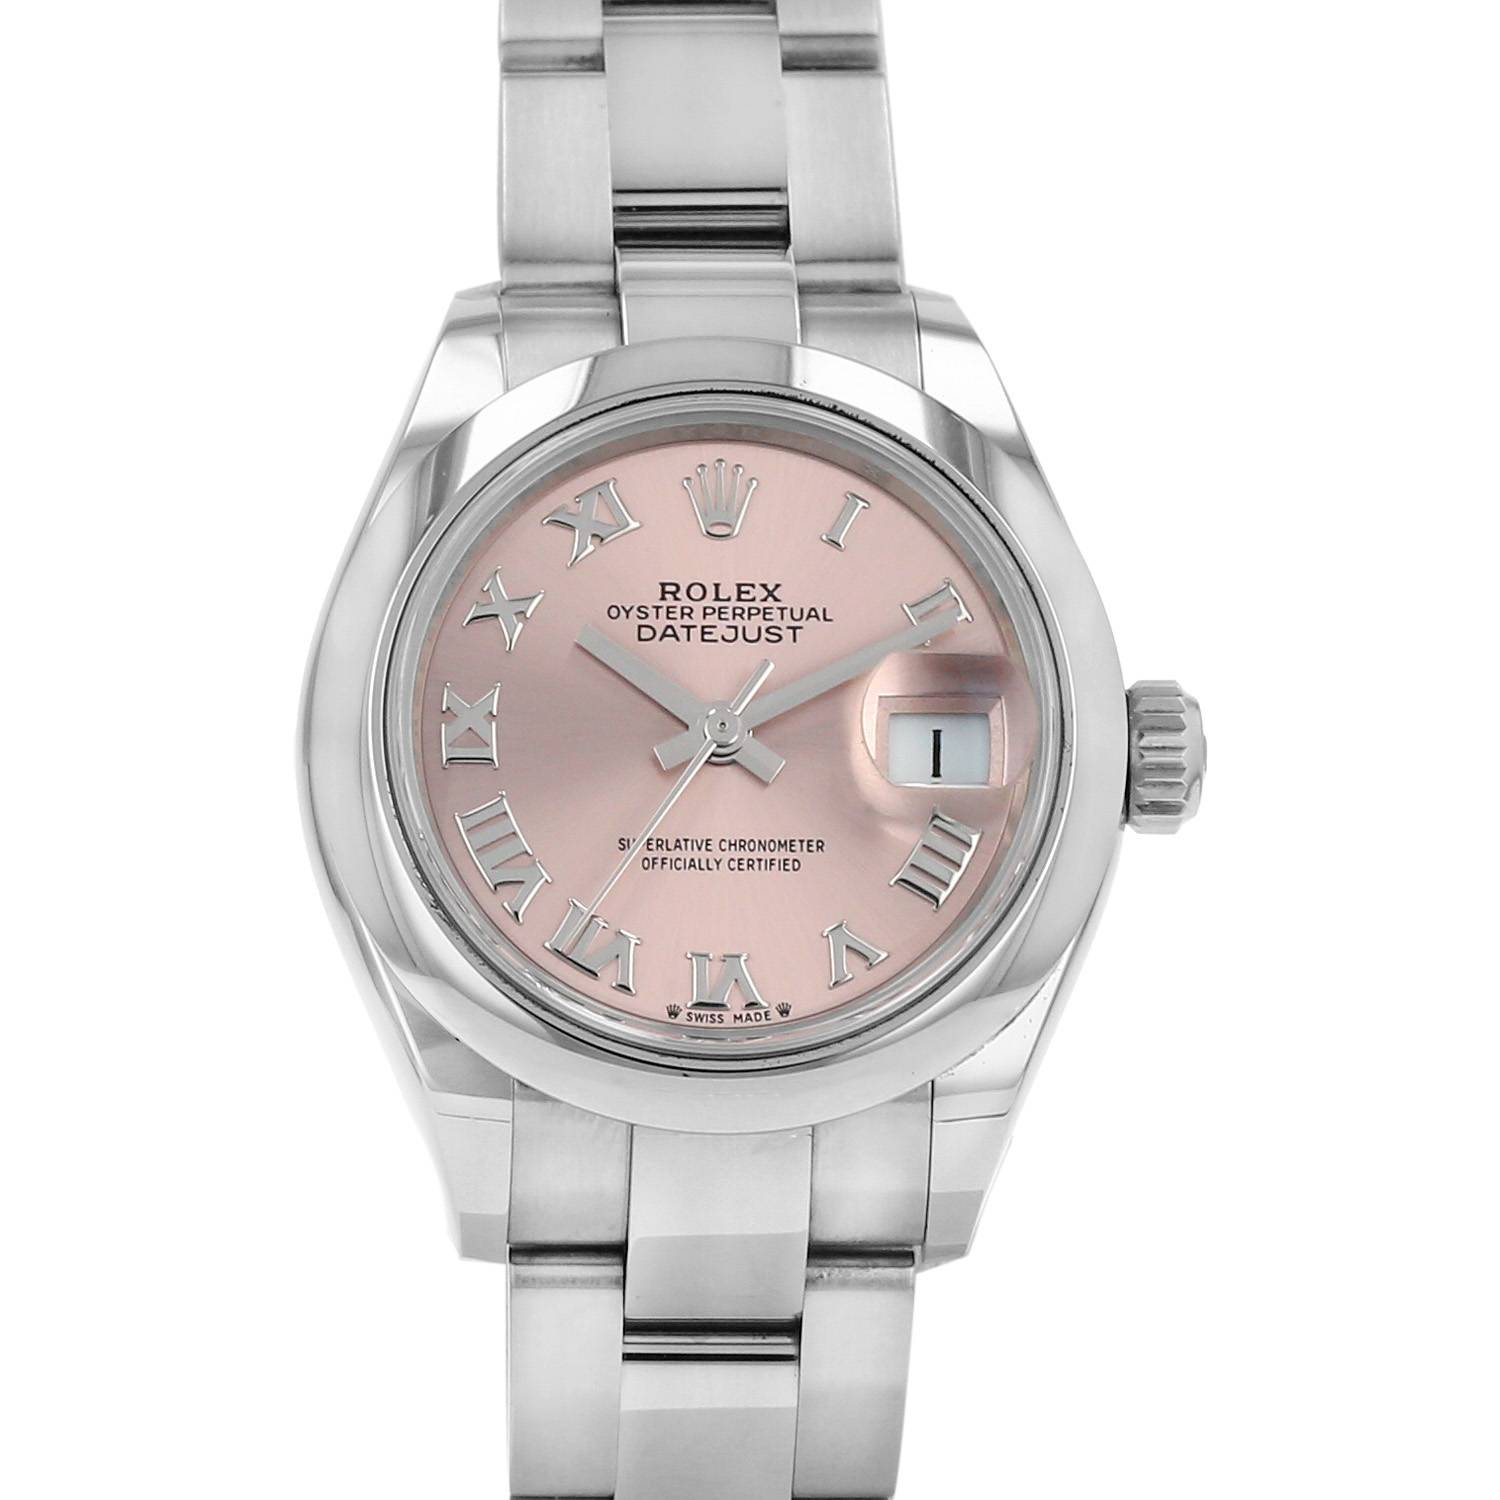 Datejust Lady In Stainless Steel Ref: 279160 Circa